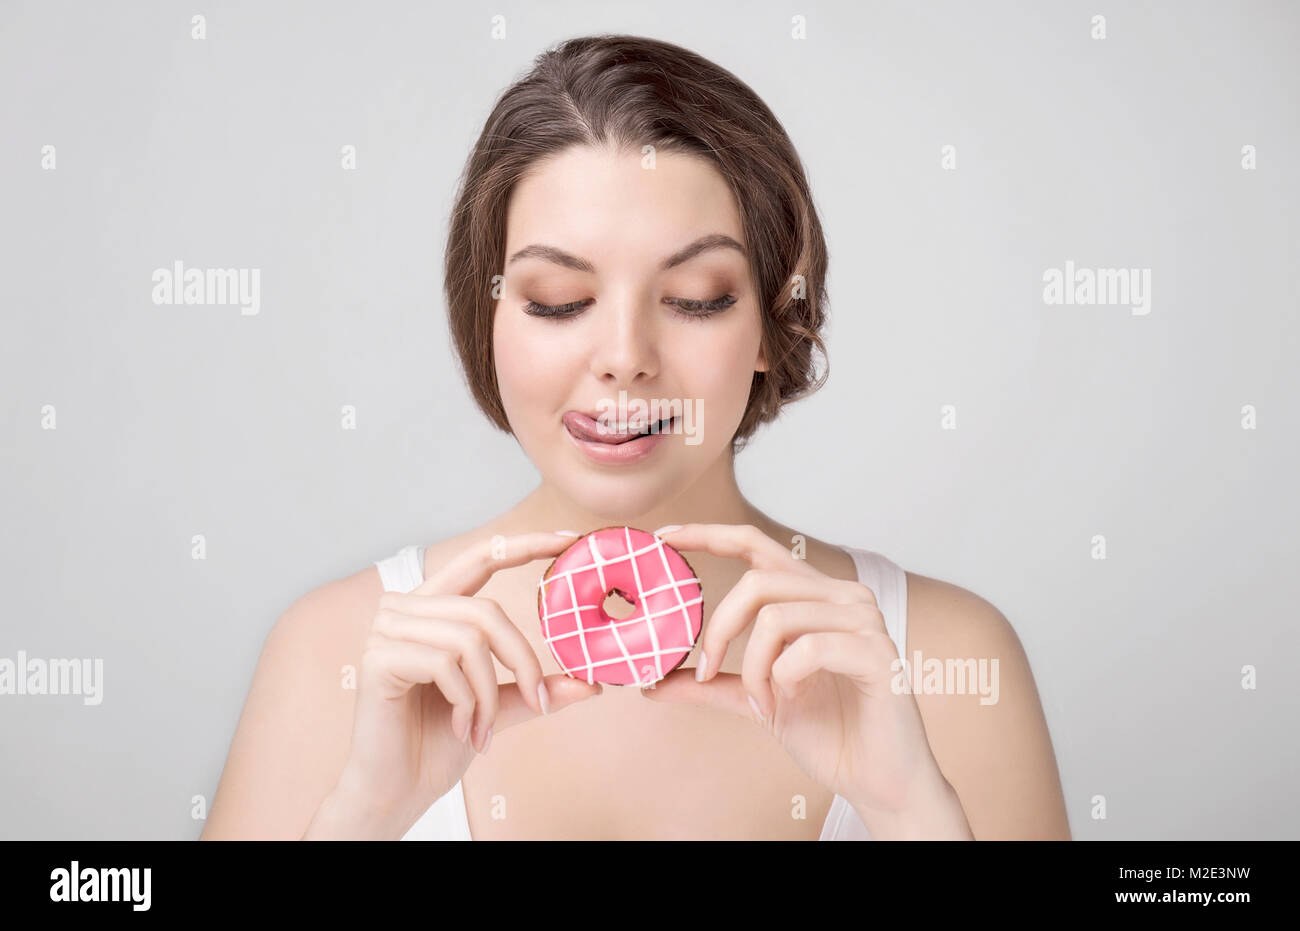 Caucasian woman holding donut and licking lips Stock Photo